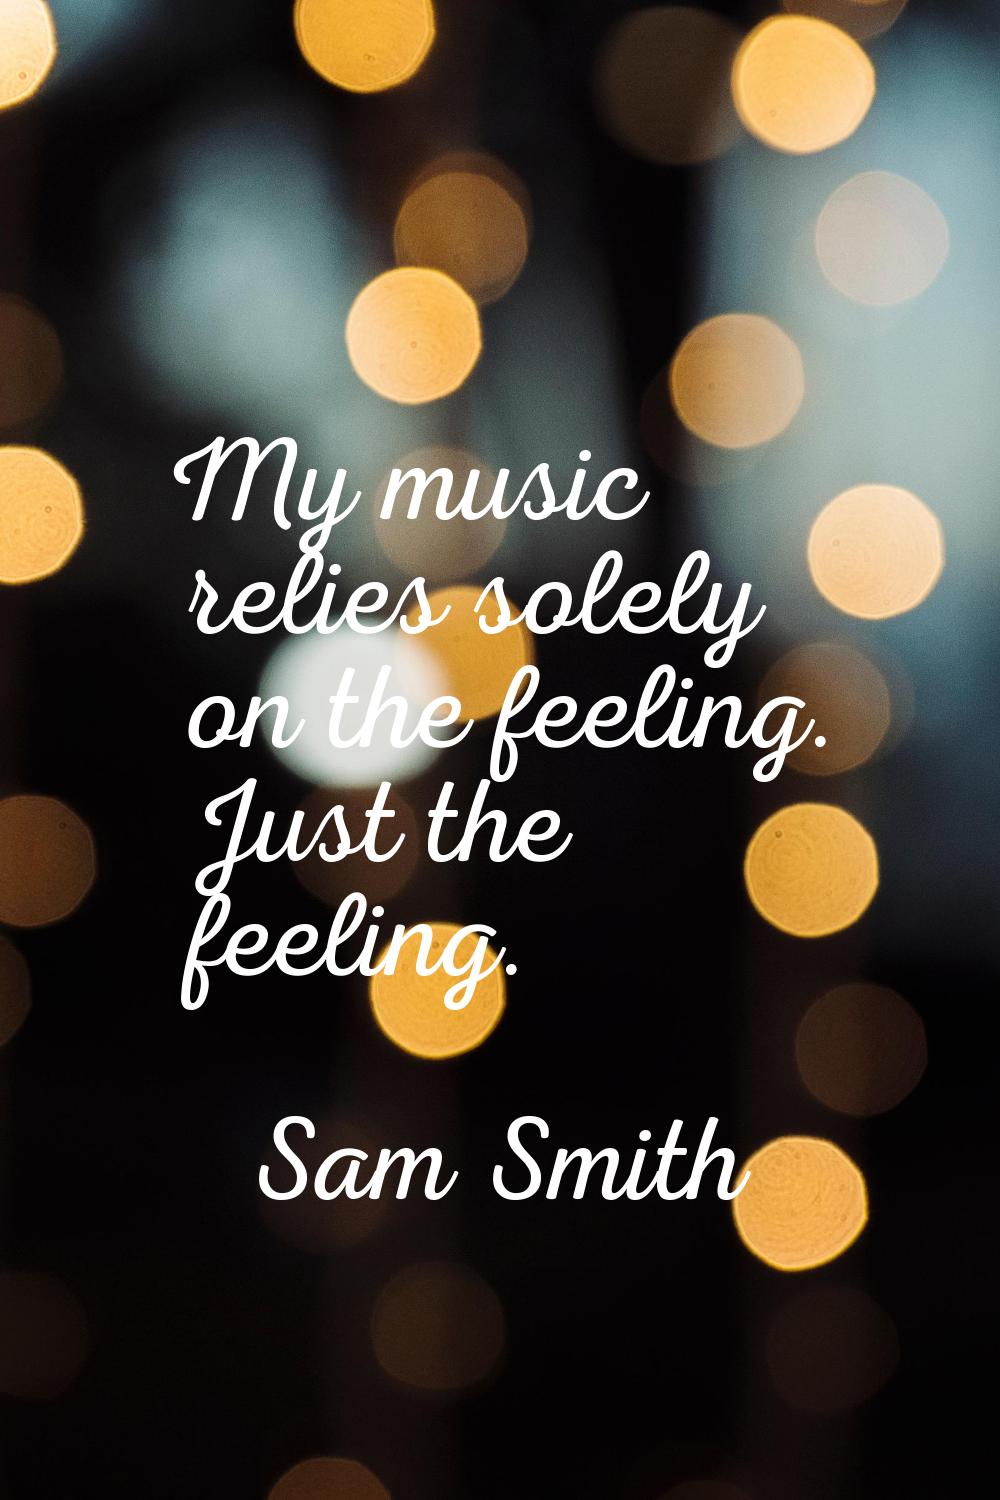 My music relies solely on the feeling. Just the feeling.